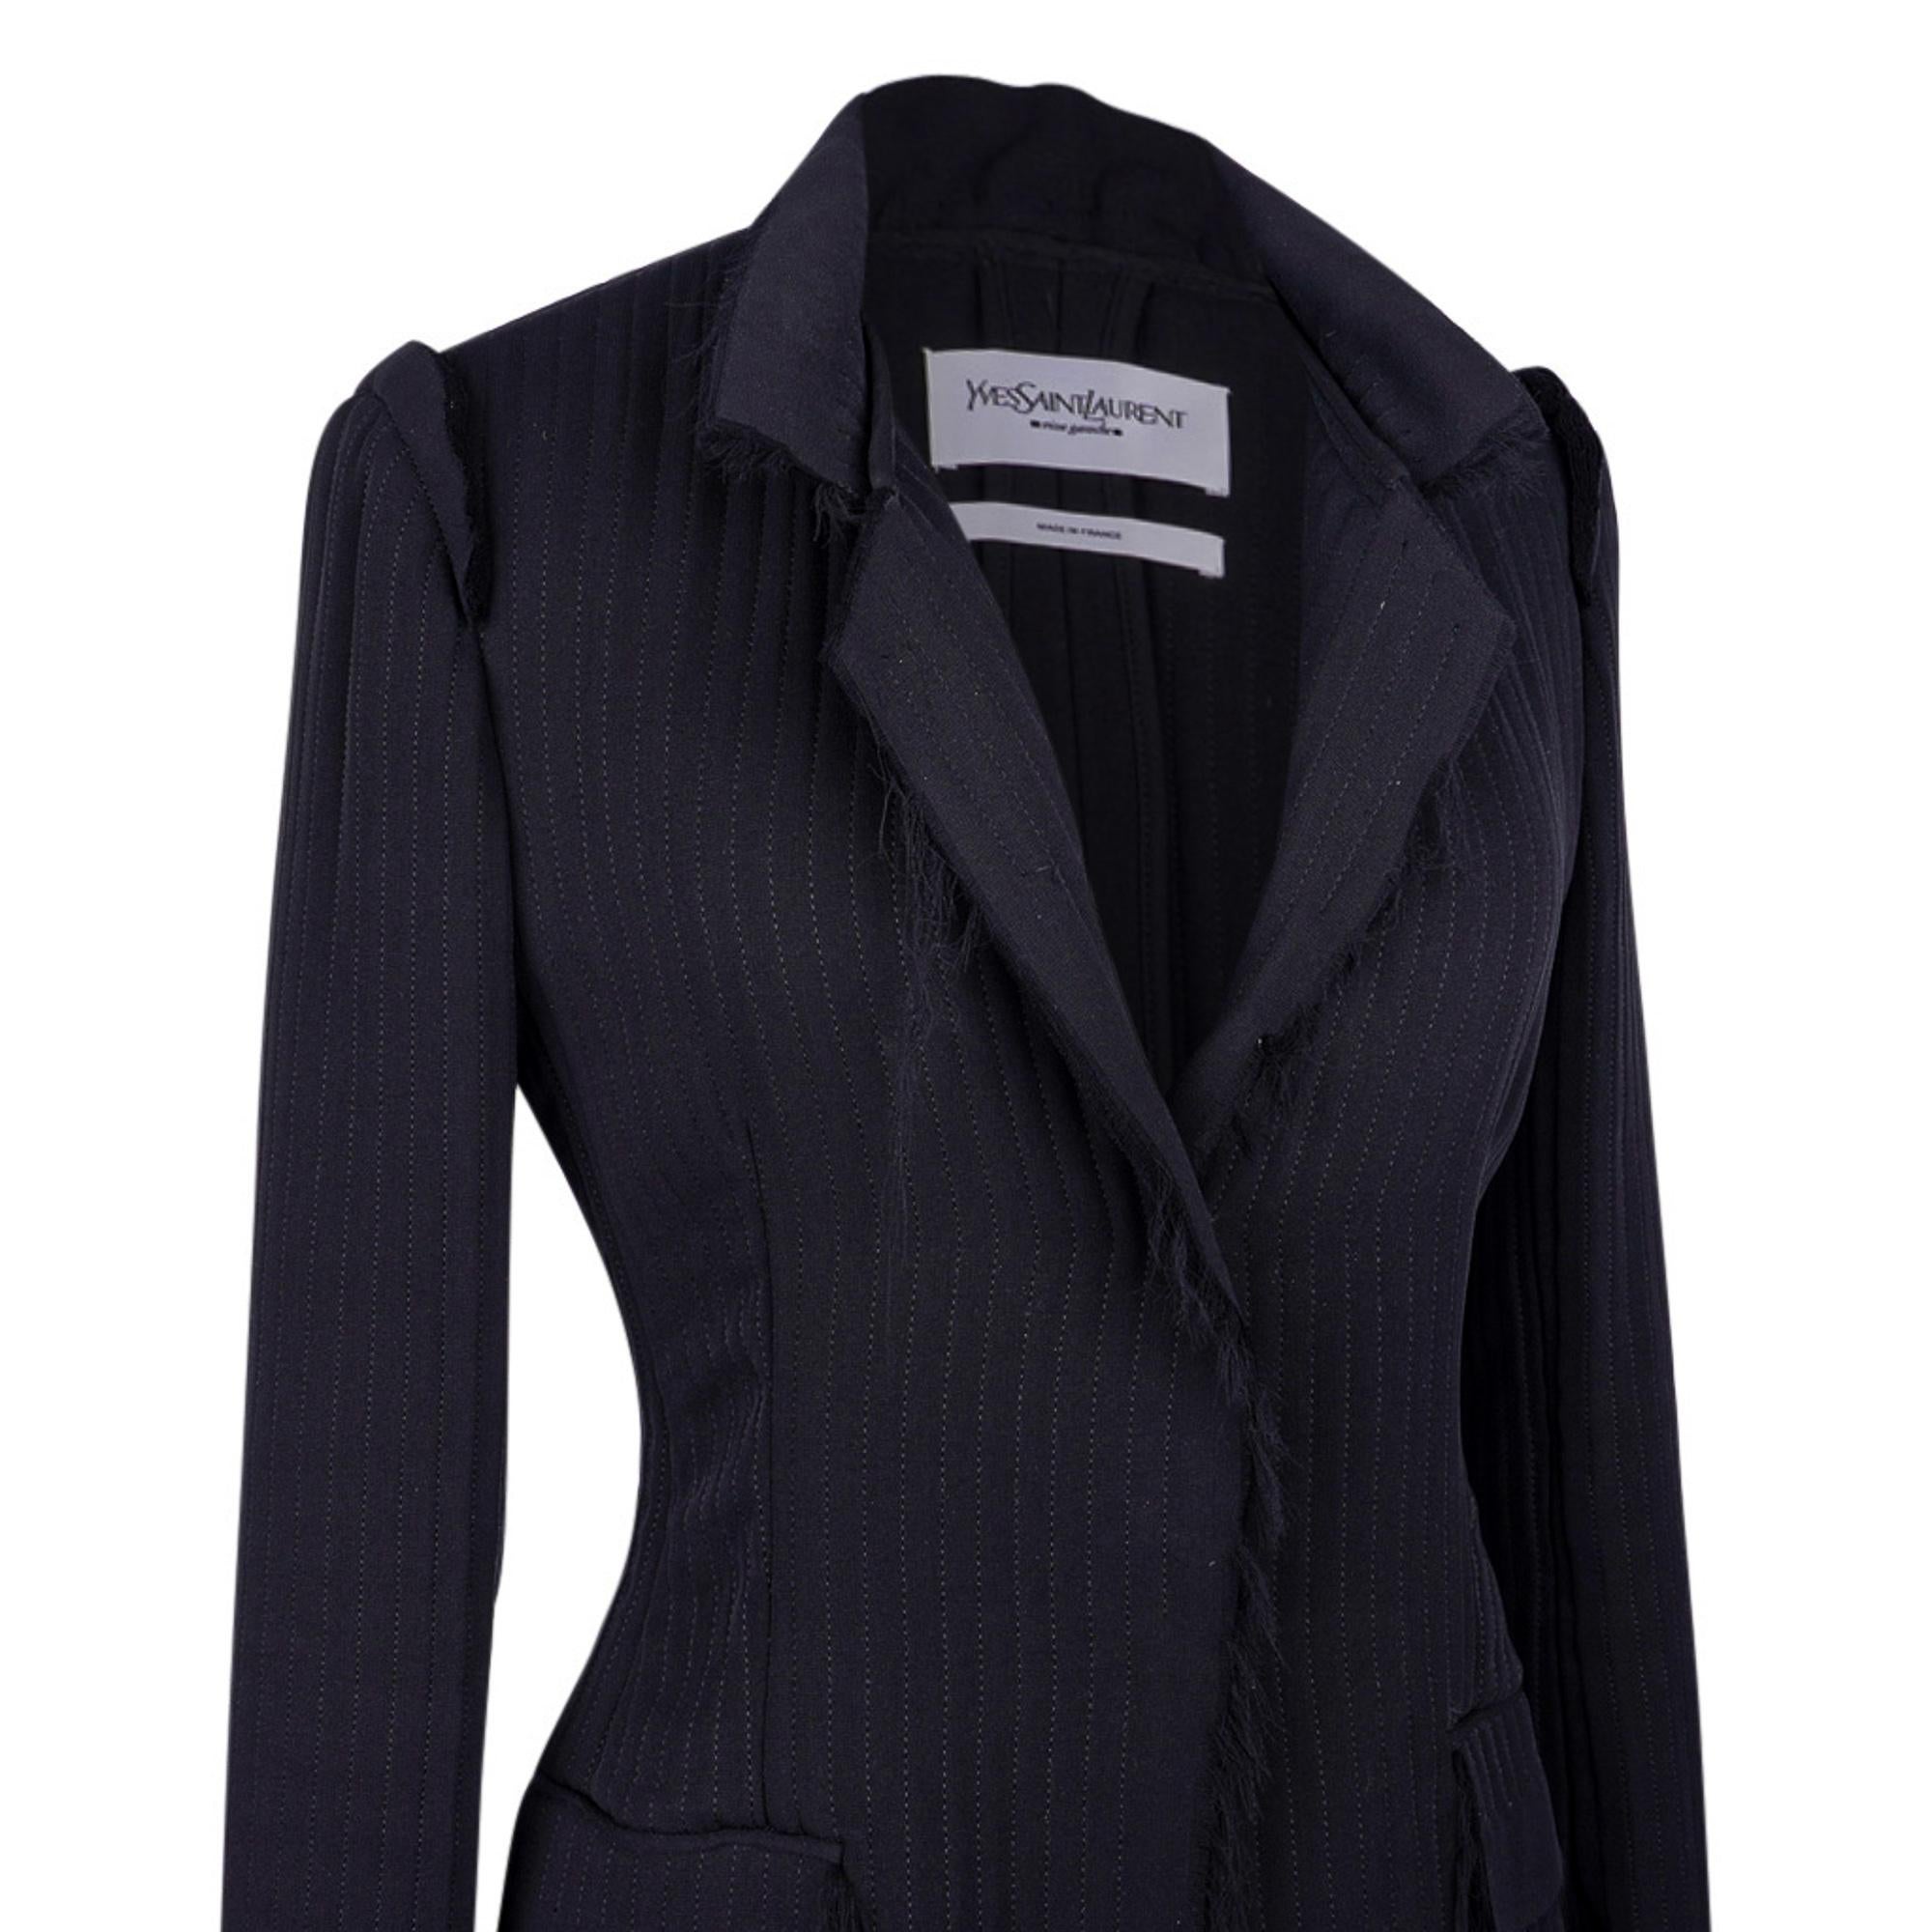 Guaranteed authentic Yves Saint Laurent Tom  Ford iconic jacket!  The MOST EXQUISITE detail and cut.
The jacket is created of many layers of silk.
Stitching detail throughout the jacket accentuates the amazing shaping.
Shoulders have a little